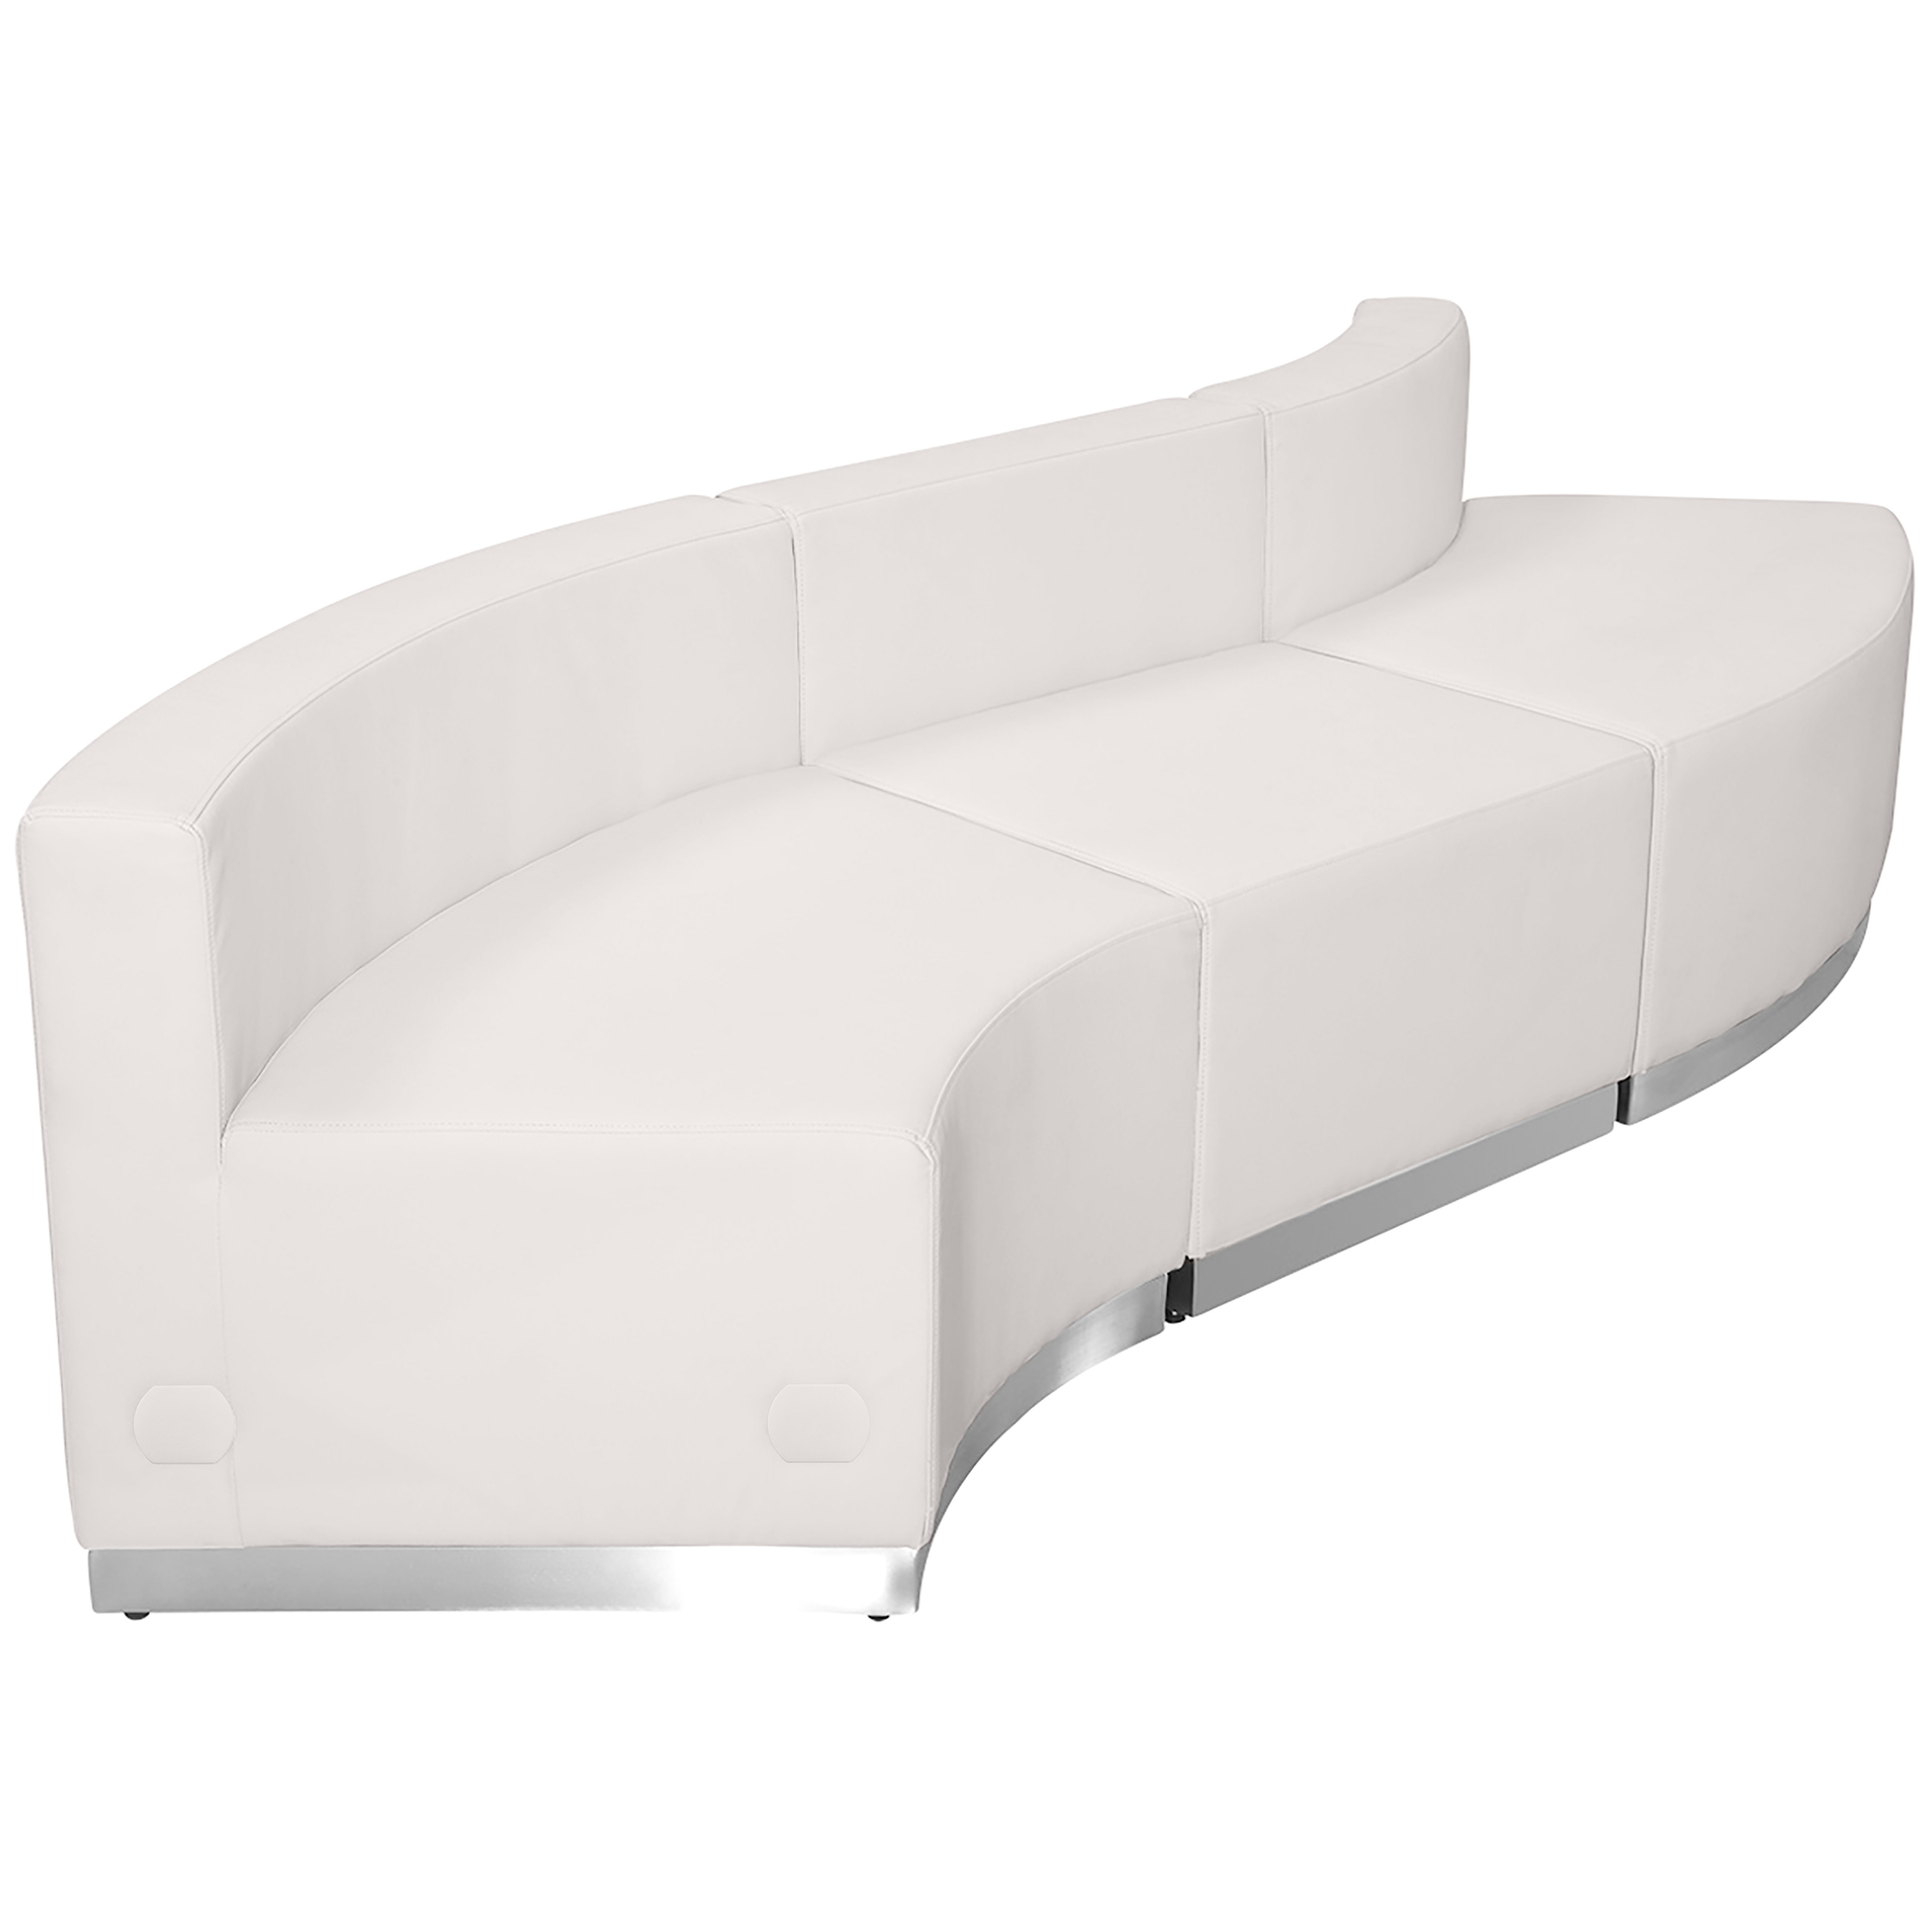 Flash Furniture, 3 PC White LeatherSoft Reception Configuration, Primary Color White, Included (qty.) 3, Model ZB803830SWH